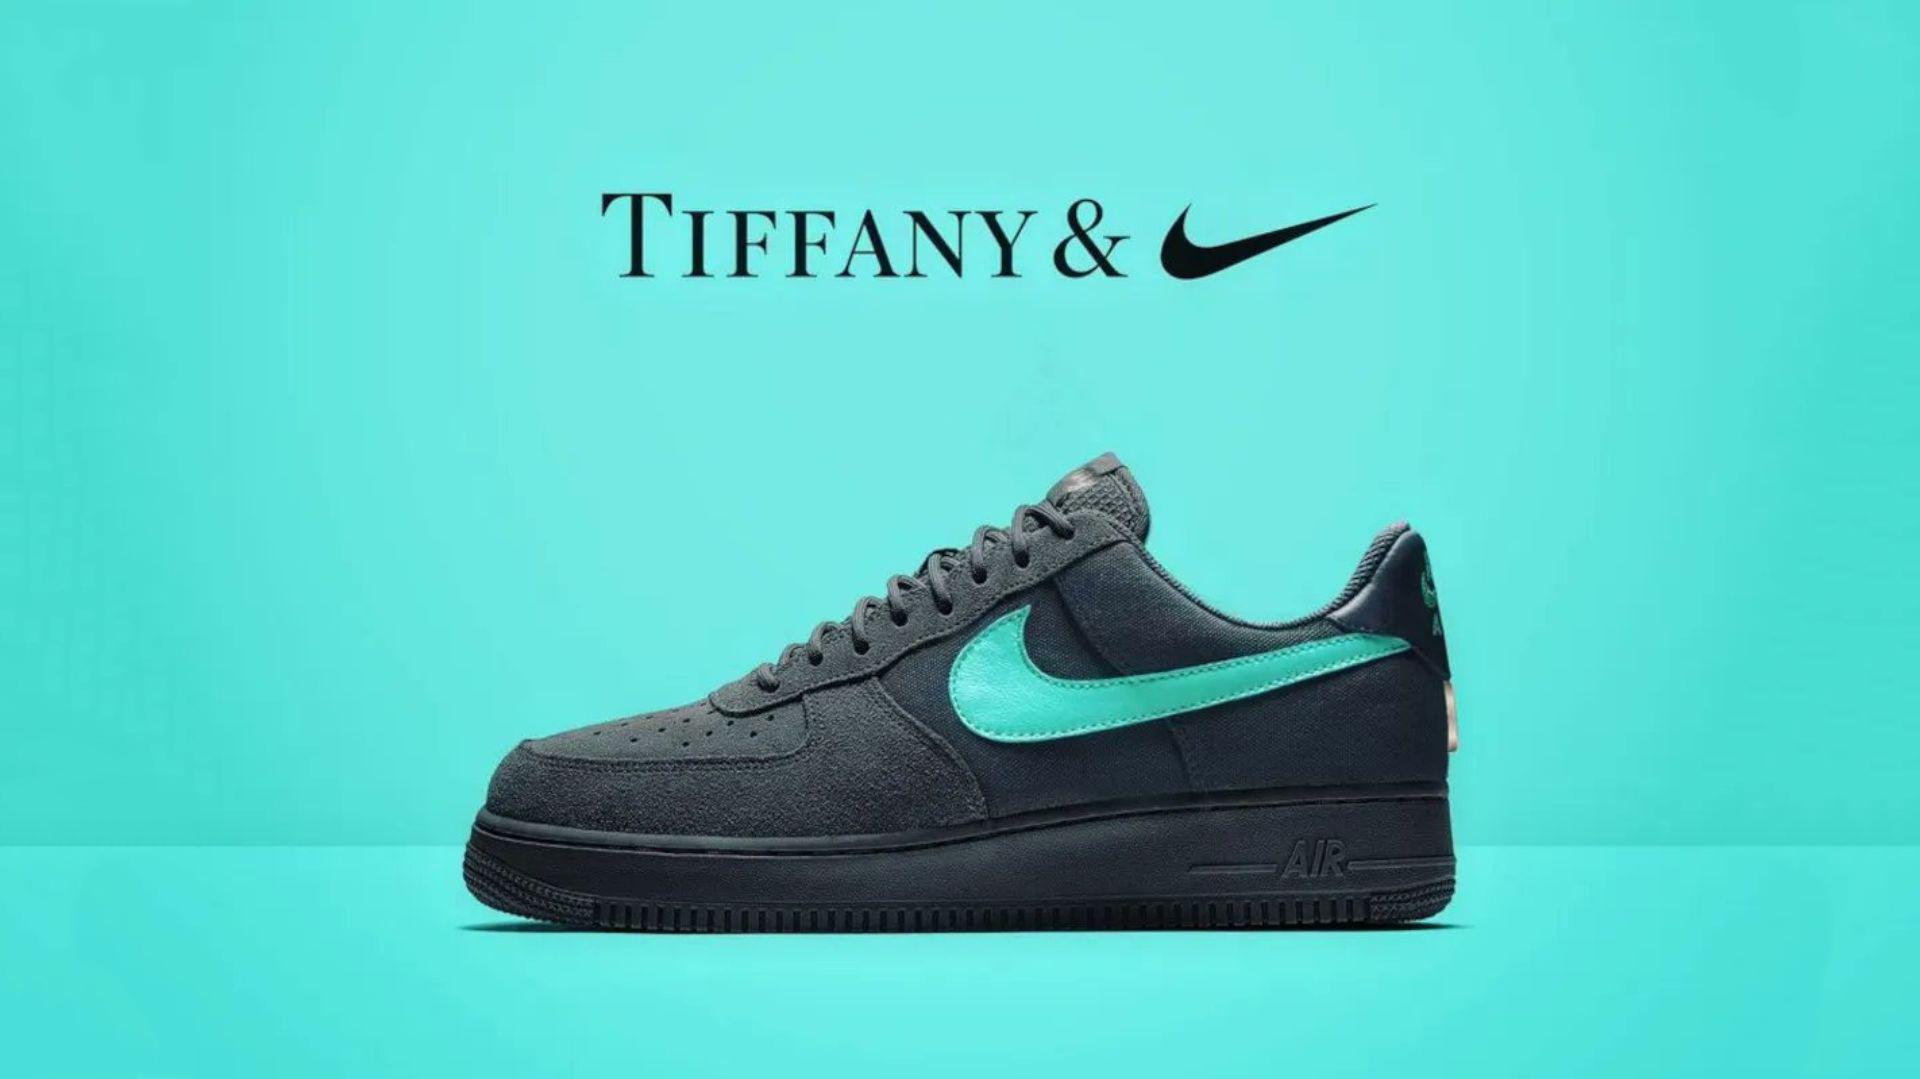 Could This Be The First Look At Nike X Tiffany Co Collaboration